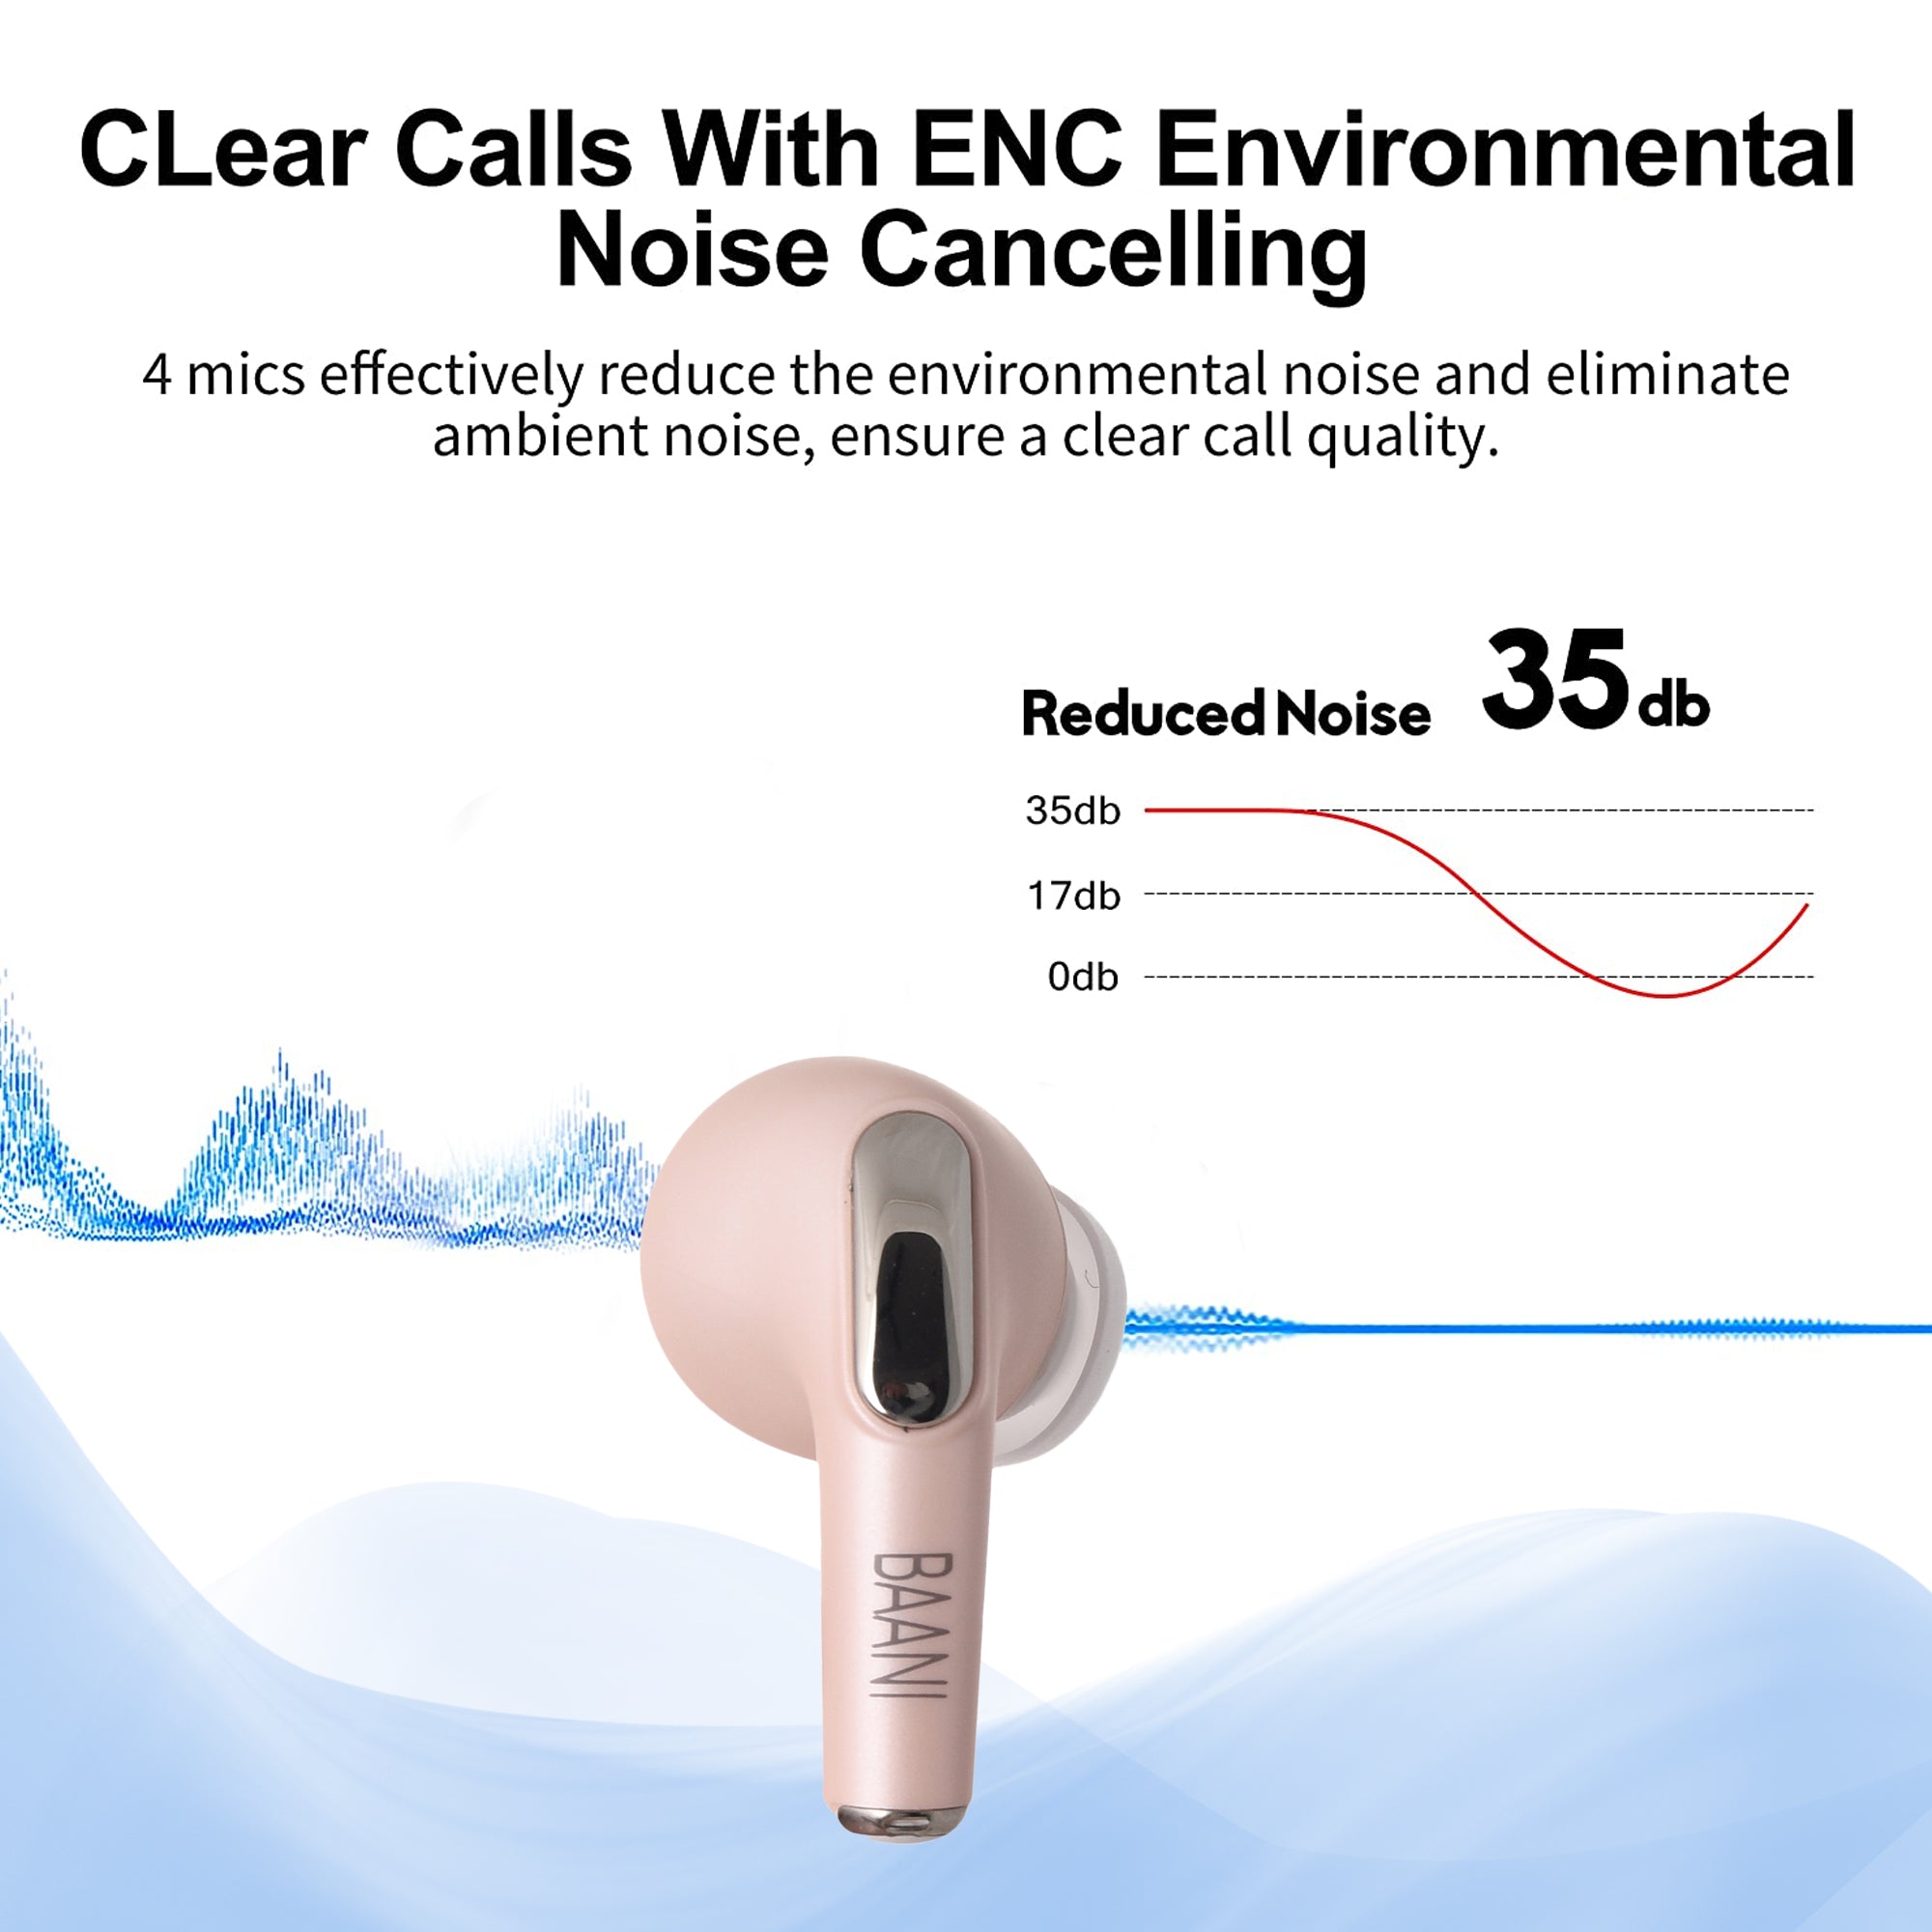 Noise cancellation features of BT 102 pink colour Earbuds by Baani Audio